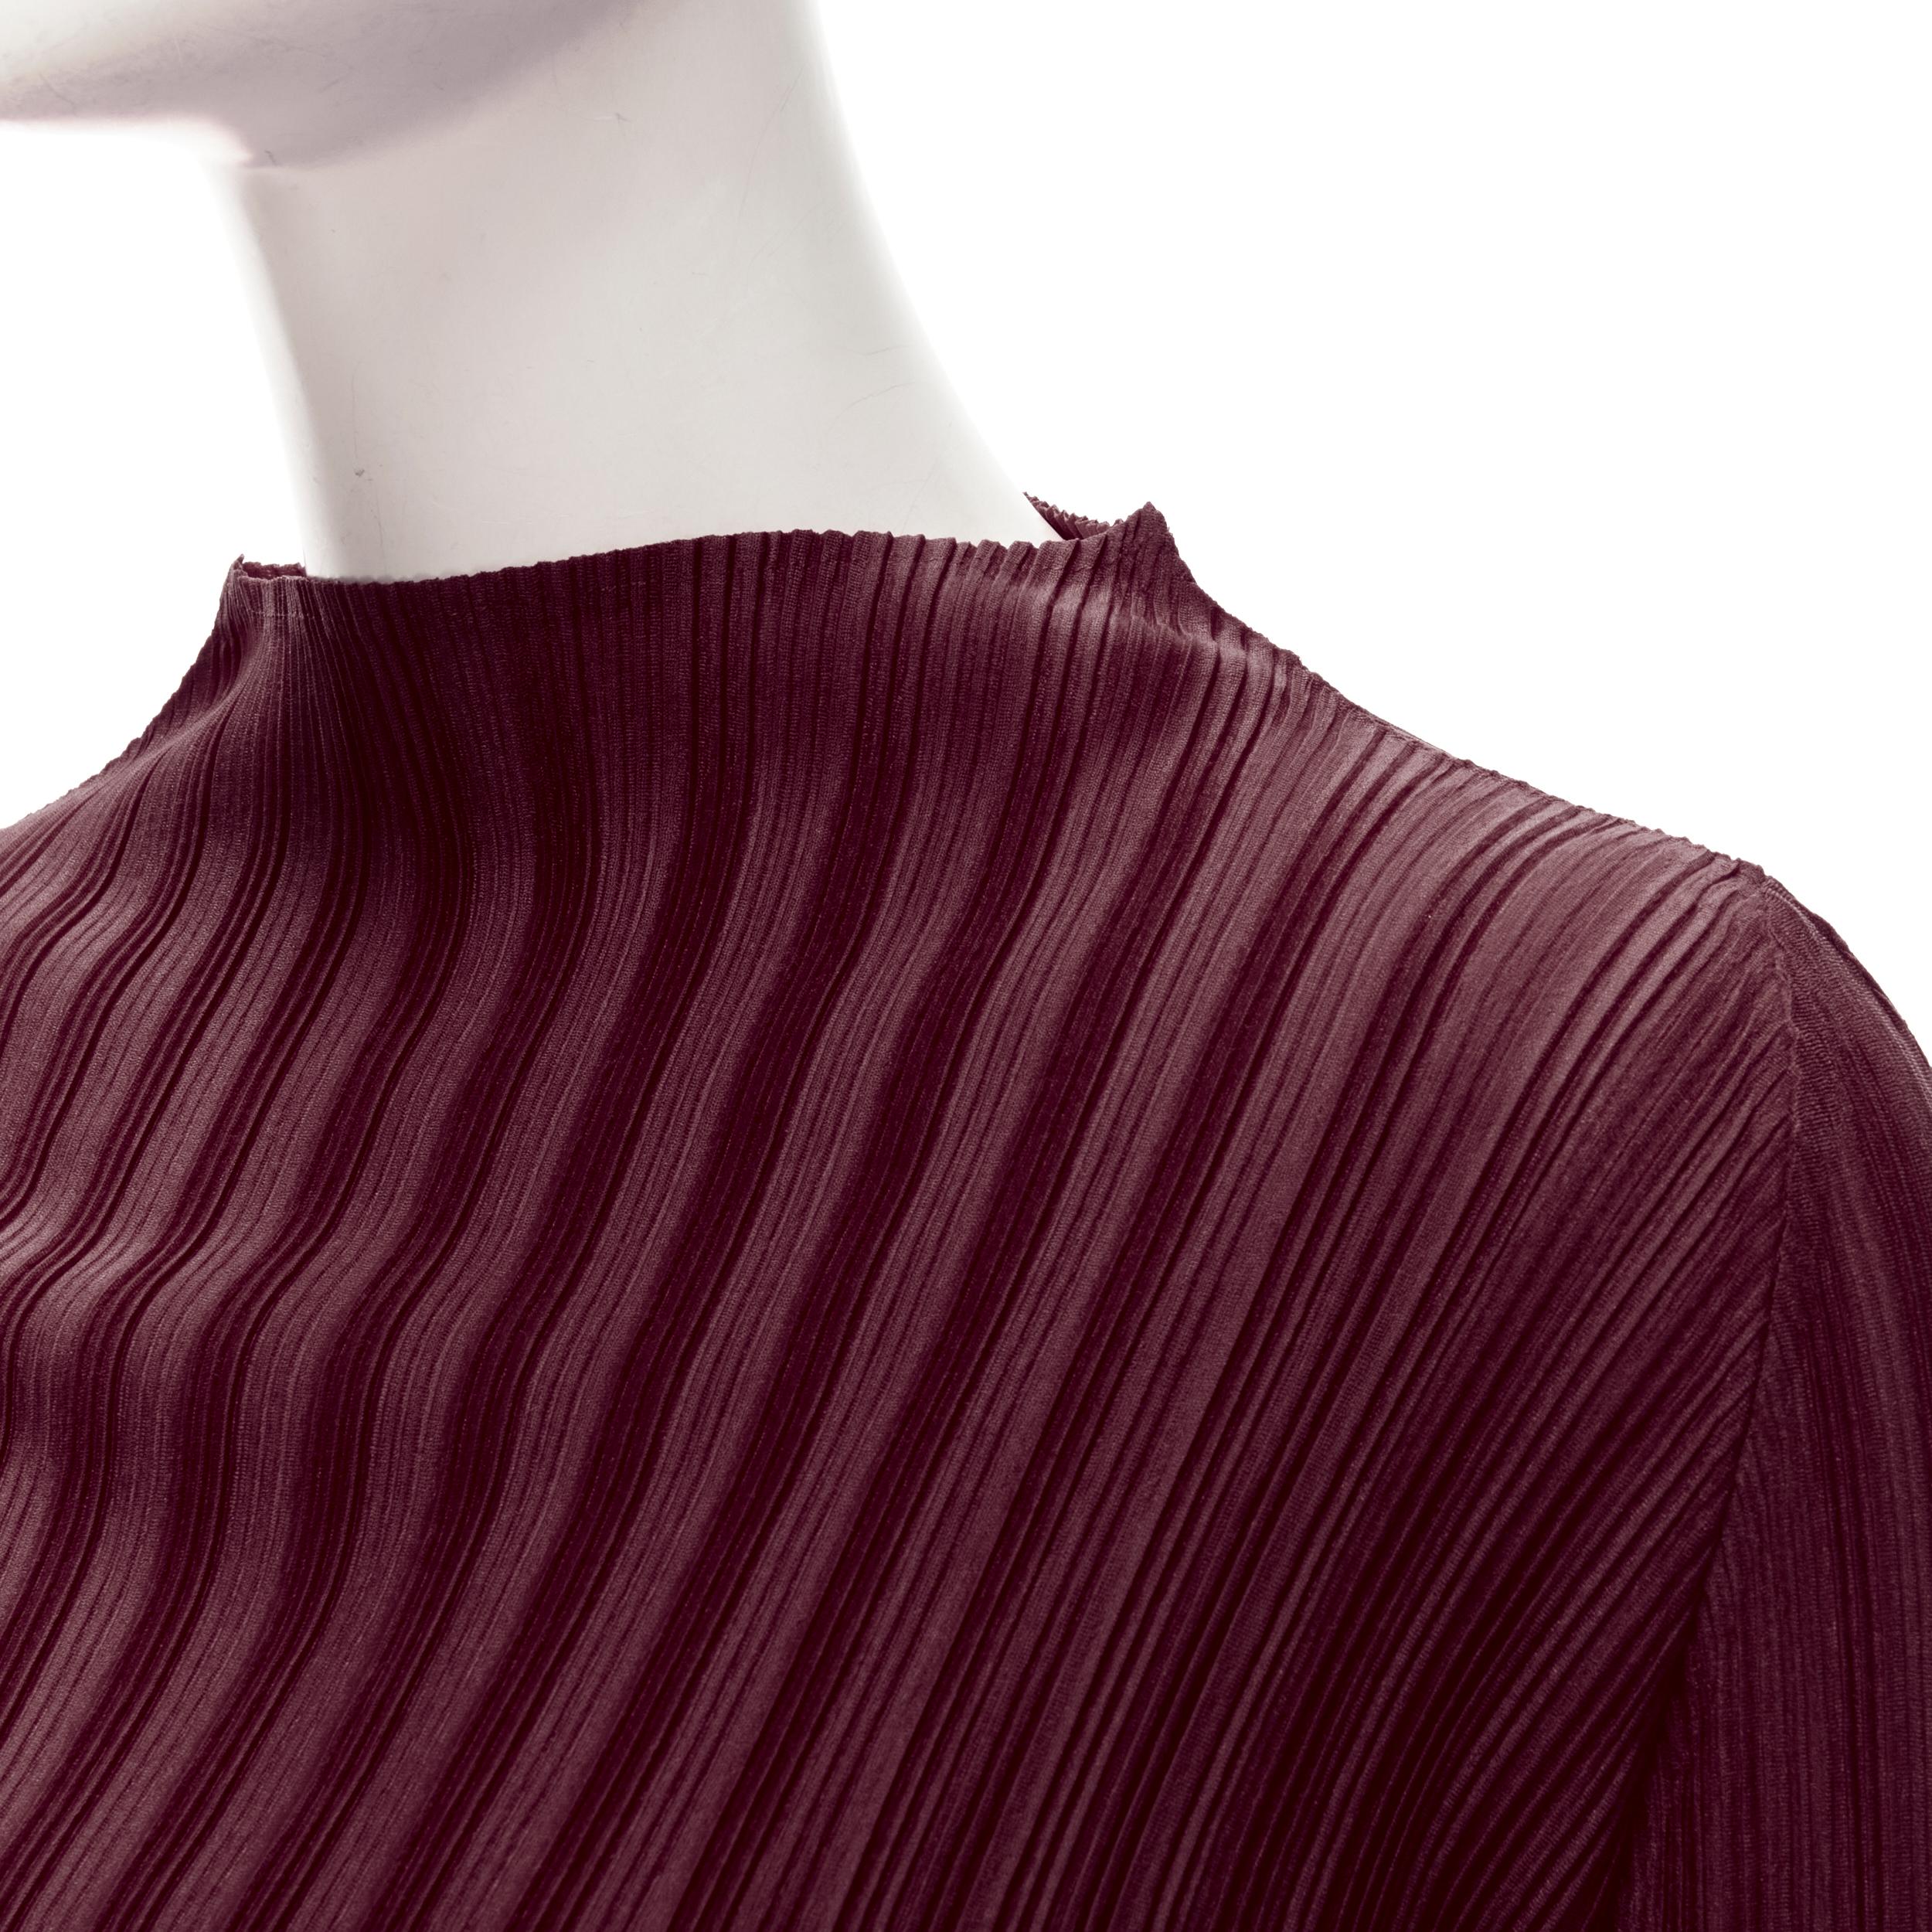 PLEATS PLEASE ISSEY MIYAKE burgundy pleated plisse mock collar top JP3 L
Brand: Pleats Please Issey Miyake
Material: Polyester
Color: Burgundy
Pattern: Solid
Made in: Japan

CONDITION:
Condition: Excellent, this item was pre-owned and is in